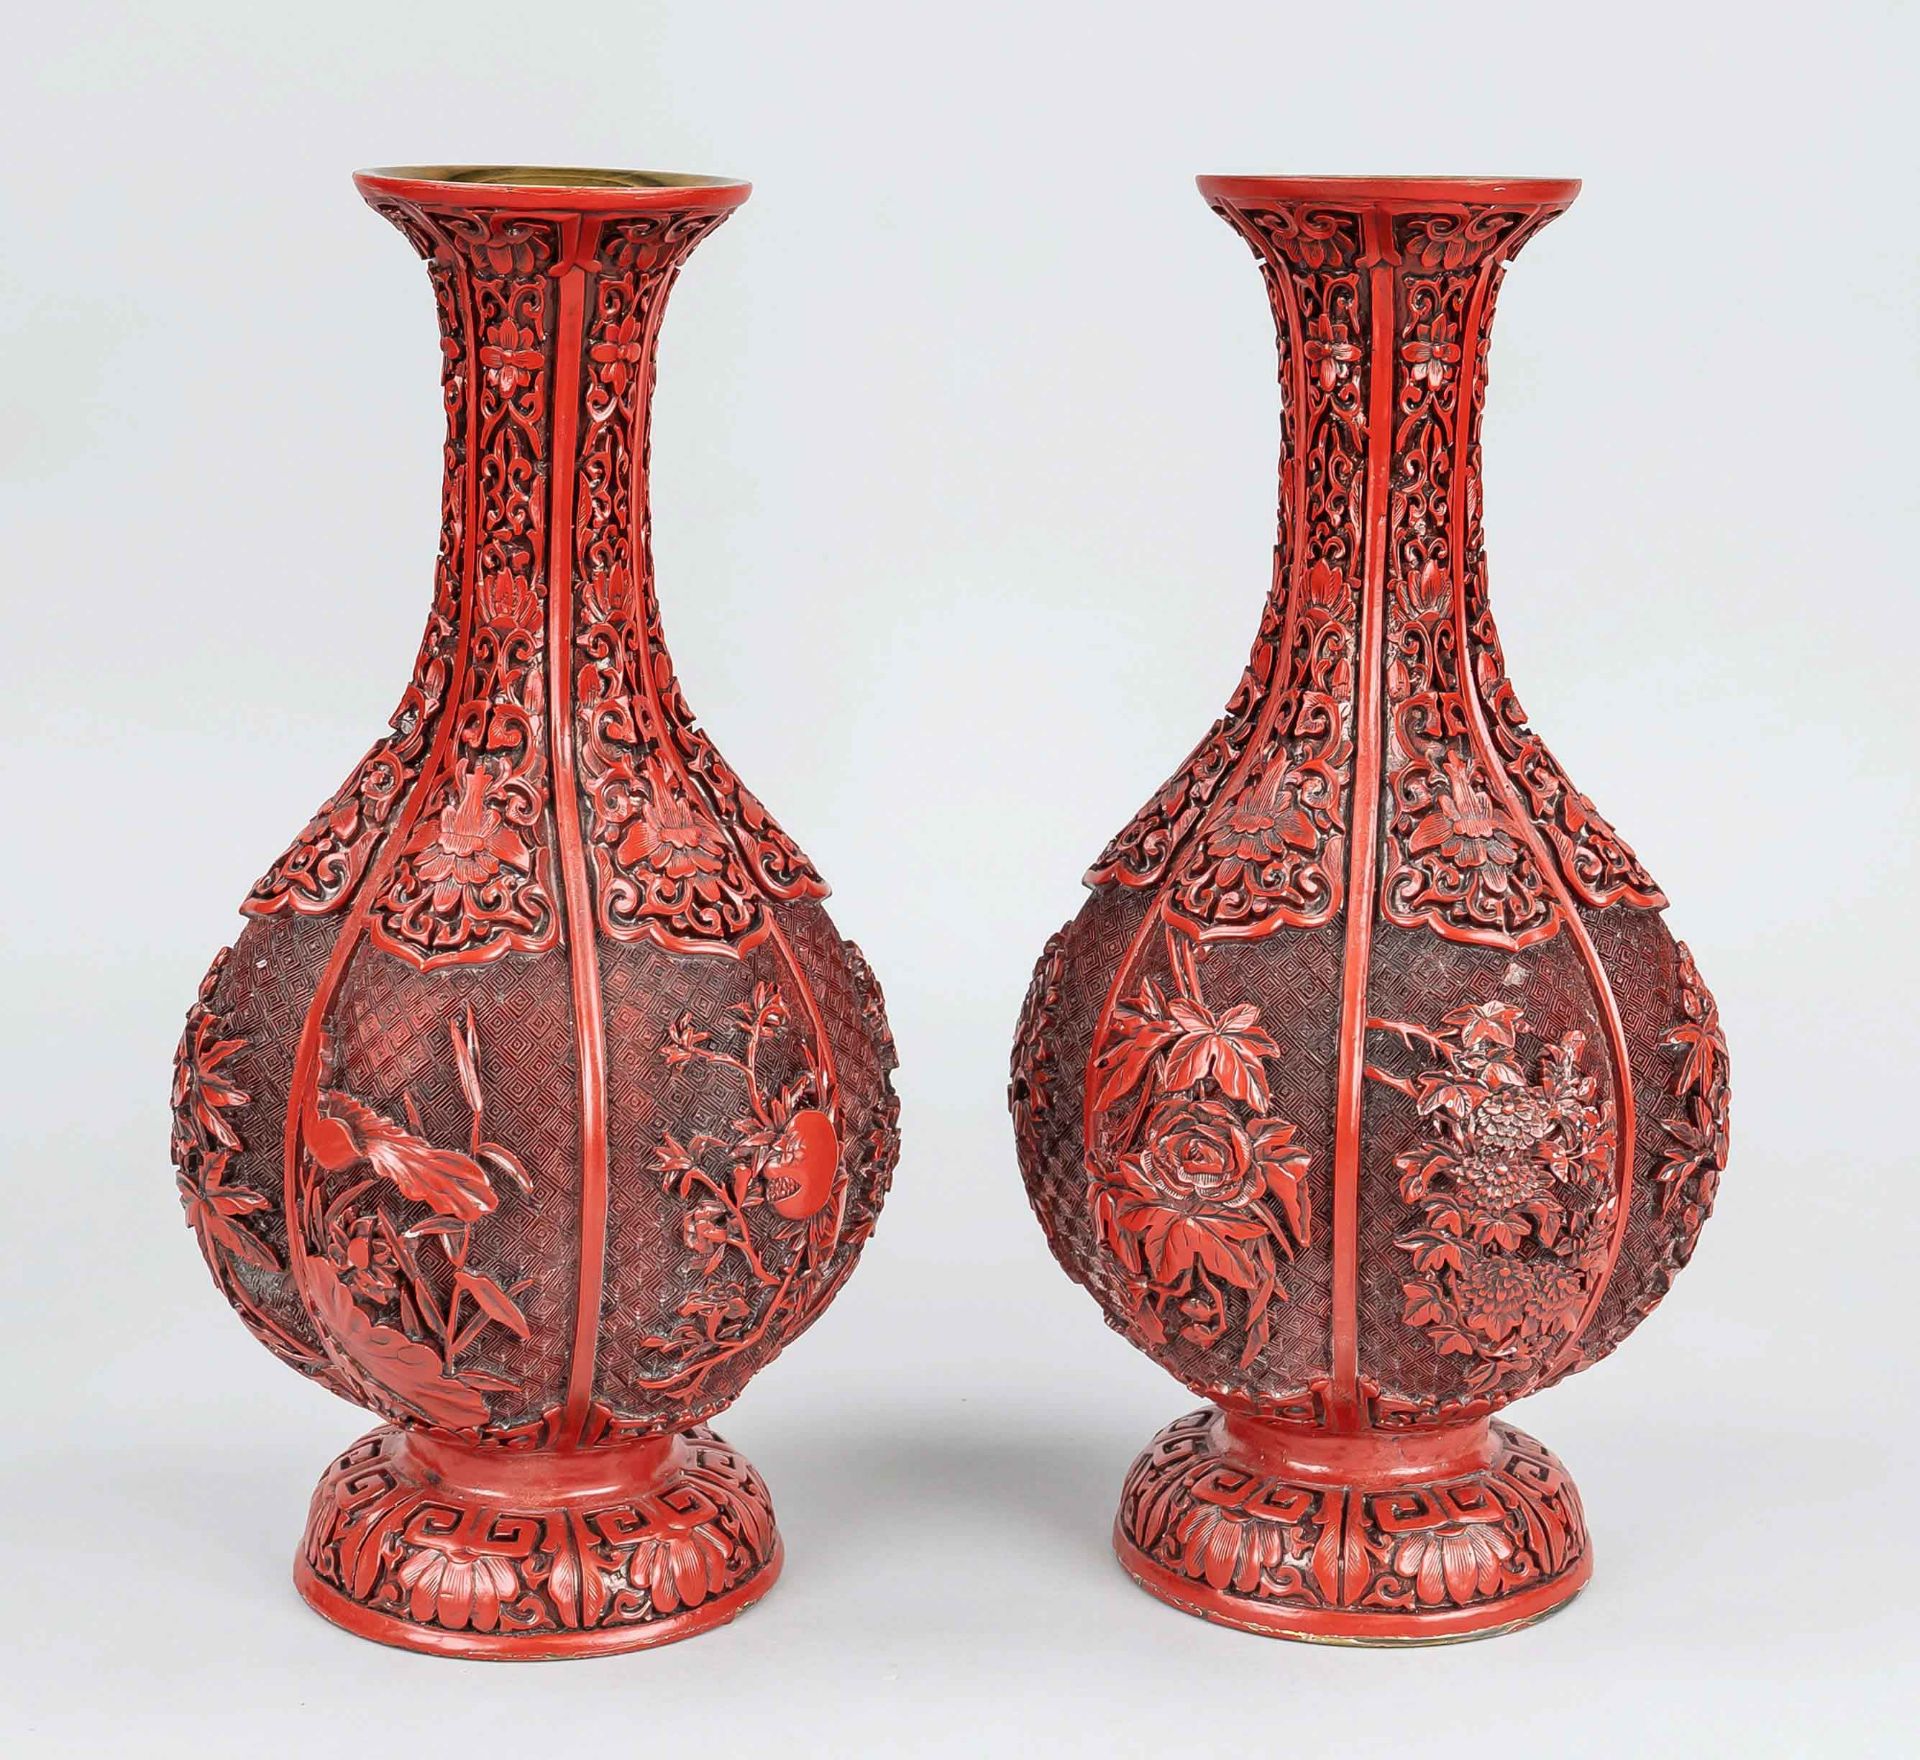 Pair of red lacquer vases, China, 19th/20th century, brass body in gourd form with red lacquer